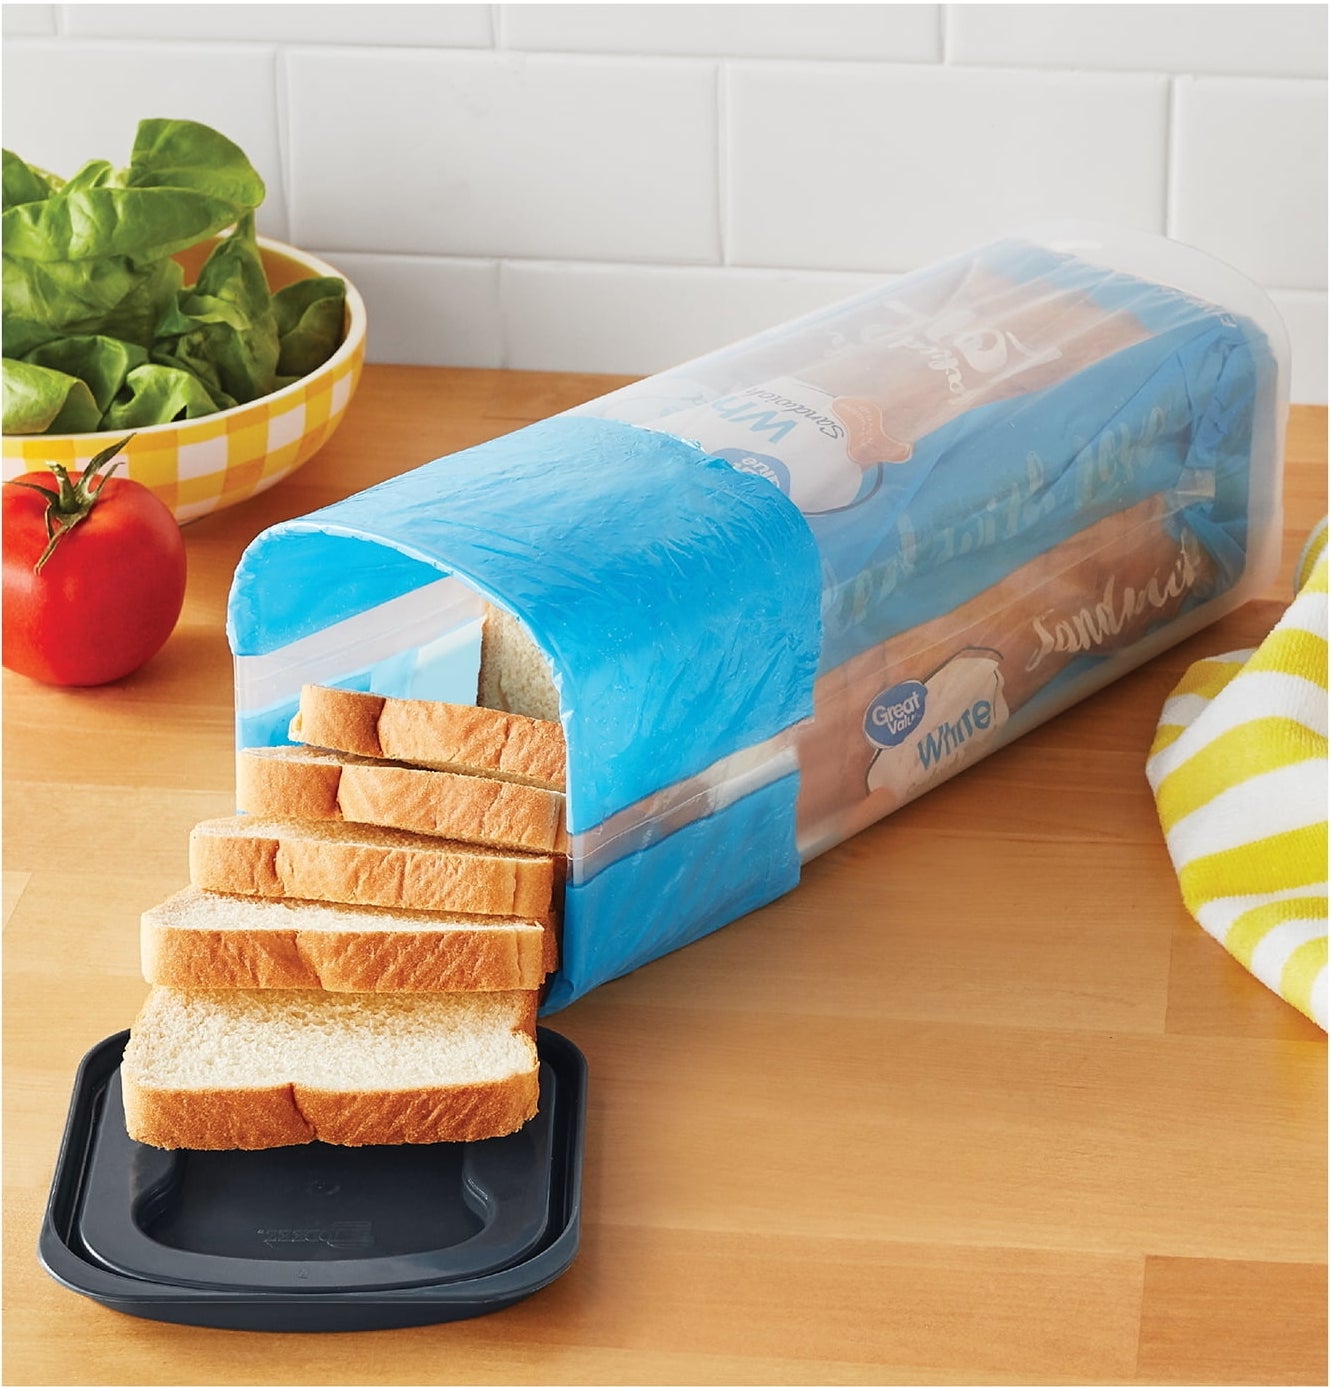 the bread saver with a loaf of bread inside